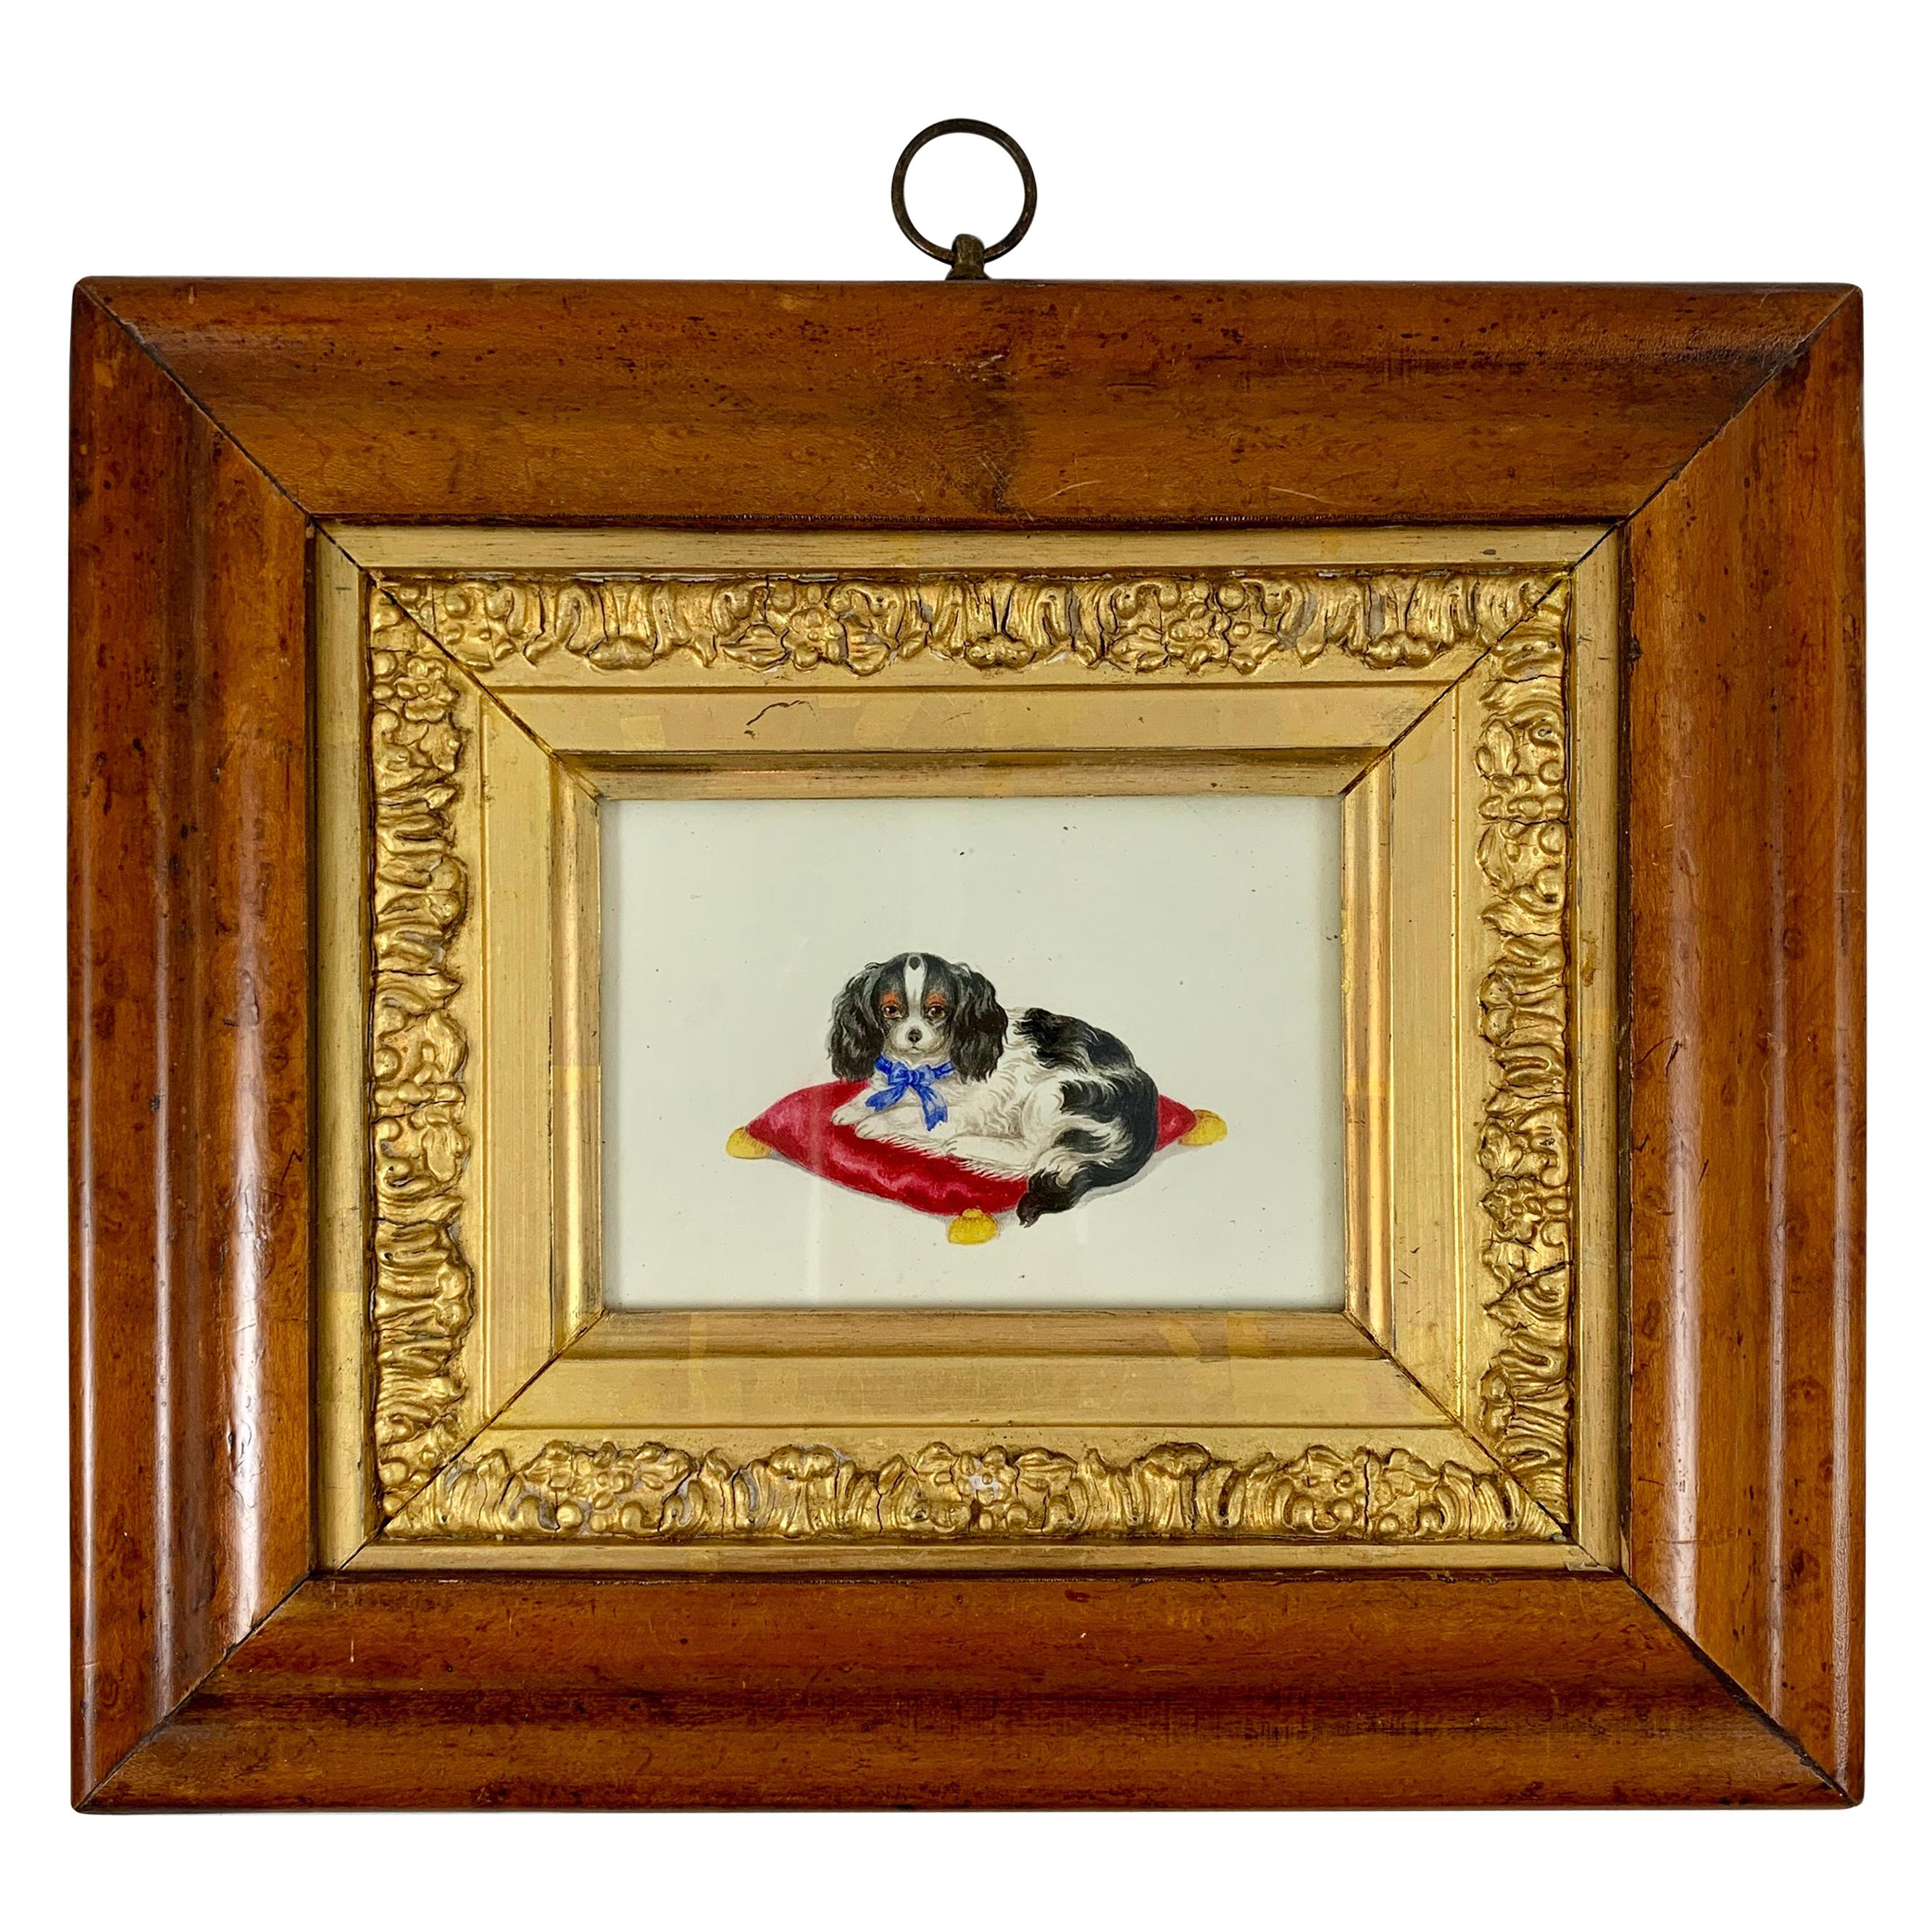 English Regency Period Fruitwood Framed Watercolor, A King Charles Spaniel